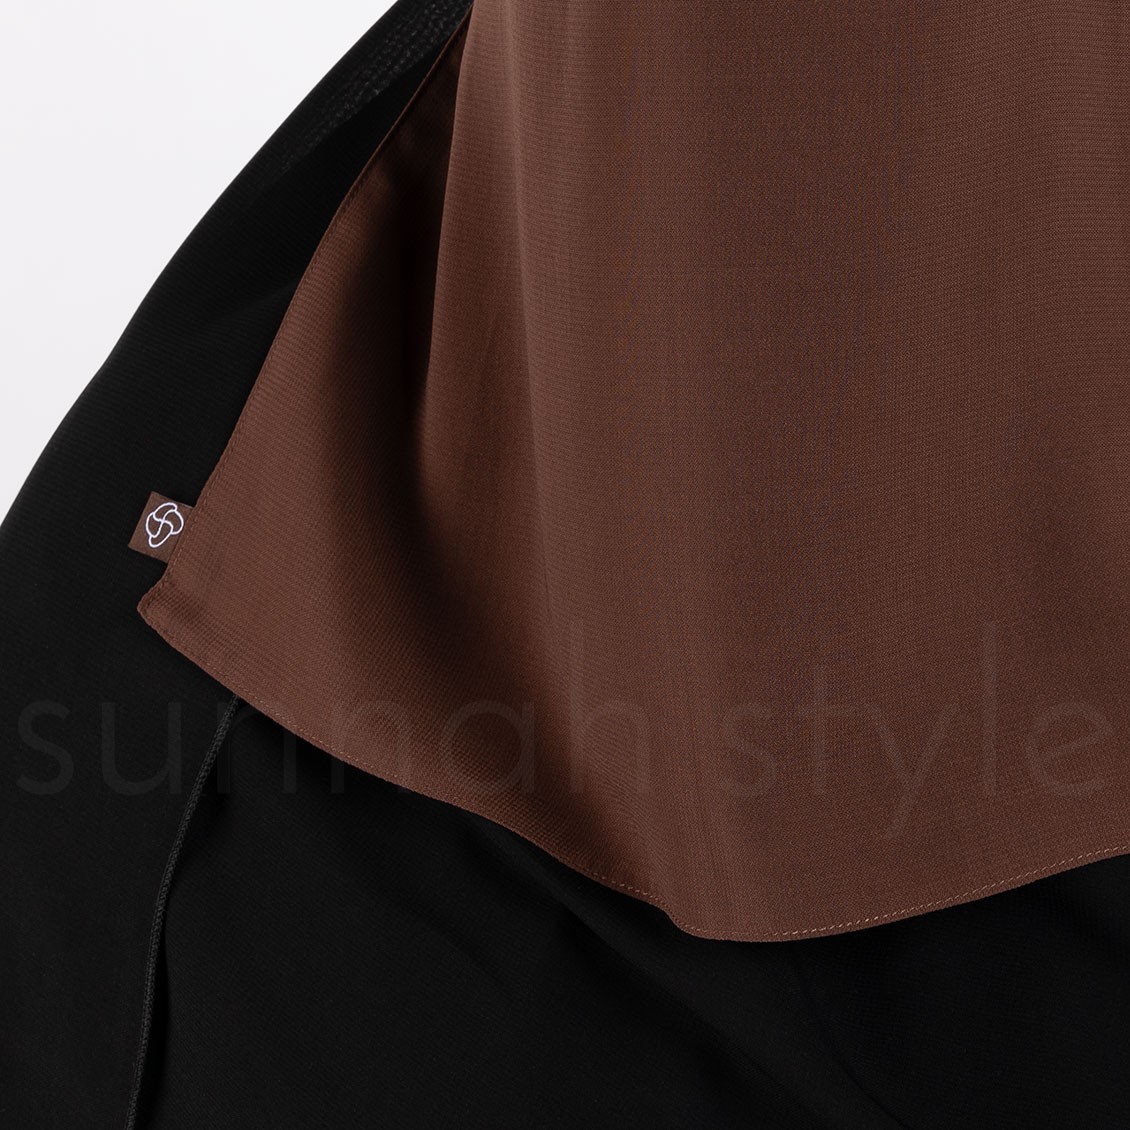 Sunnah Style Short One Layer Niqab Pecan